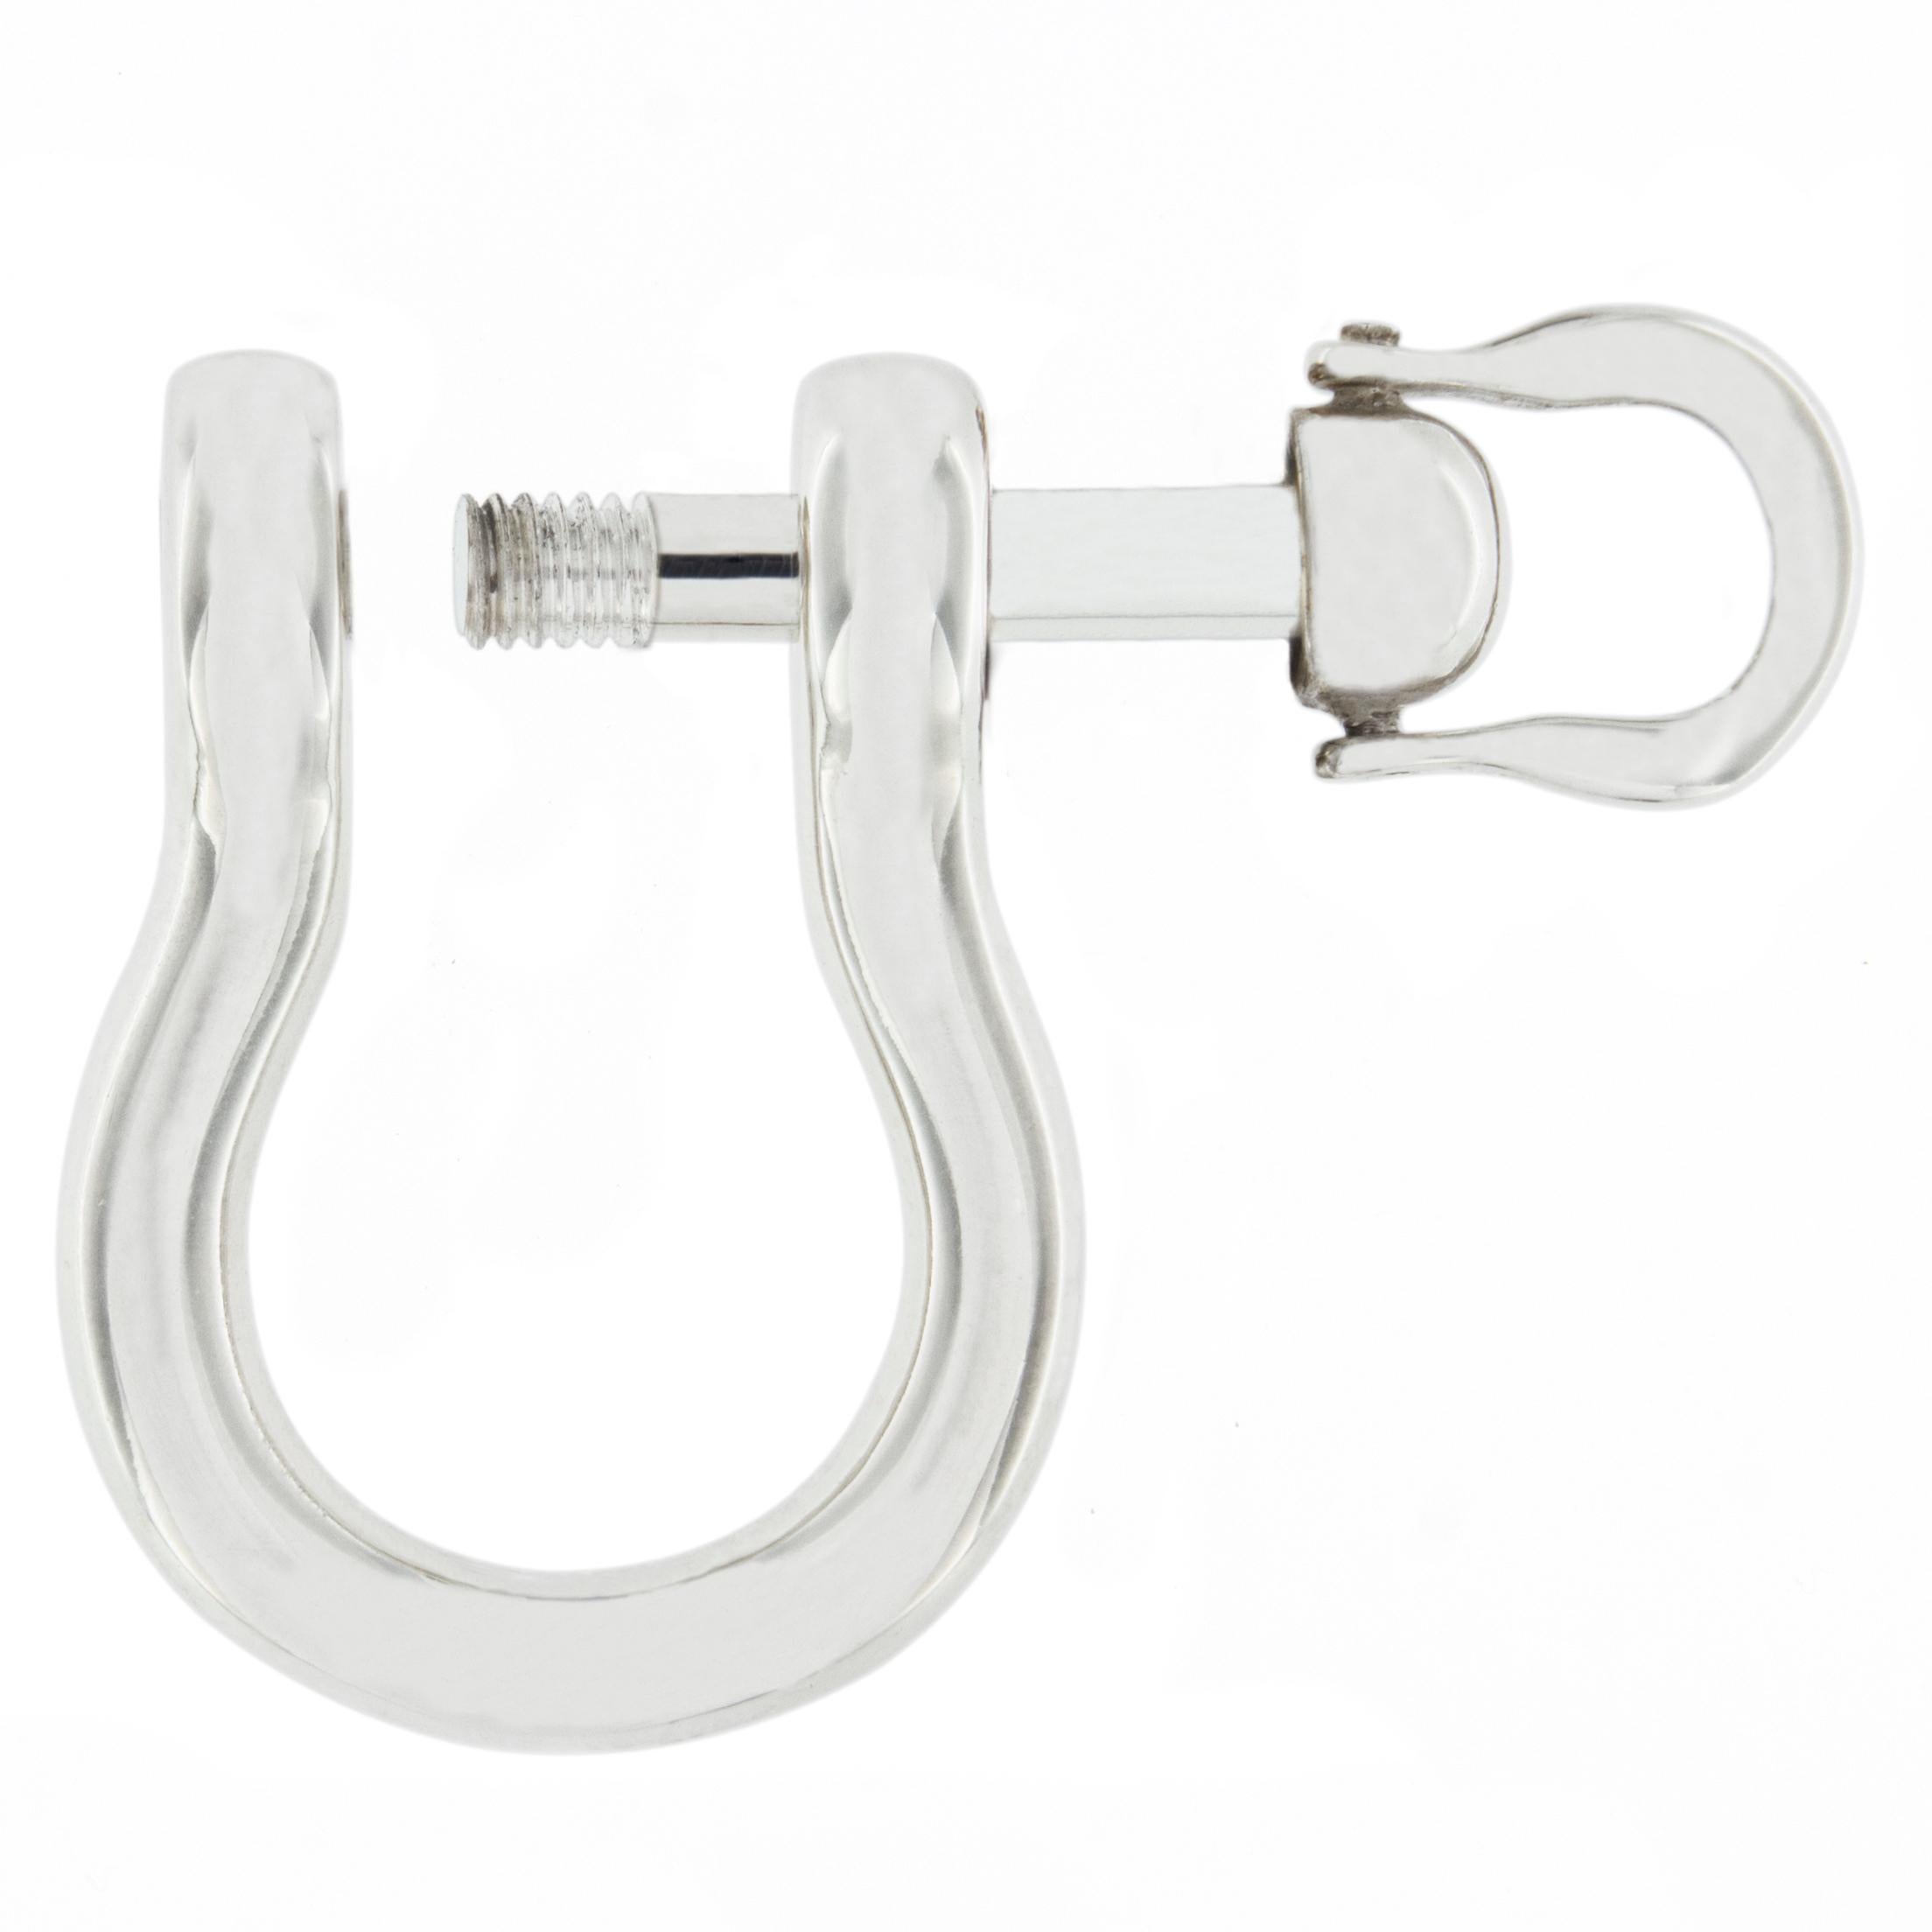 Jona design collection, hand crafted in Italy, Shackle Sterling Silver key holder. 
Dimension: W 1.44 in / 36,57 mm X L 1.34 in/ 34 mm X D 0.42 in / 10,66 mm
Weight : 22 g
All Jona jewelry is new and has never been previously owned or worn. Each